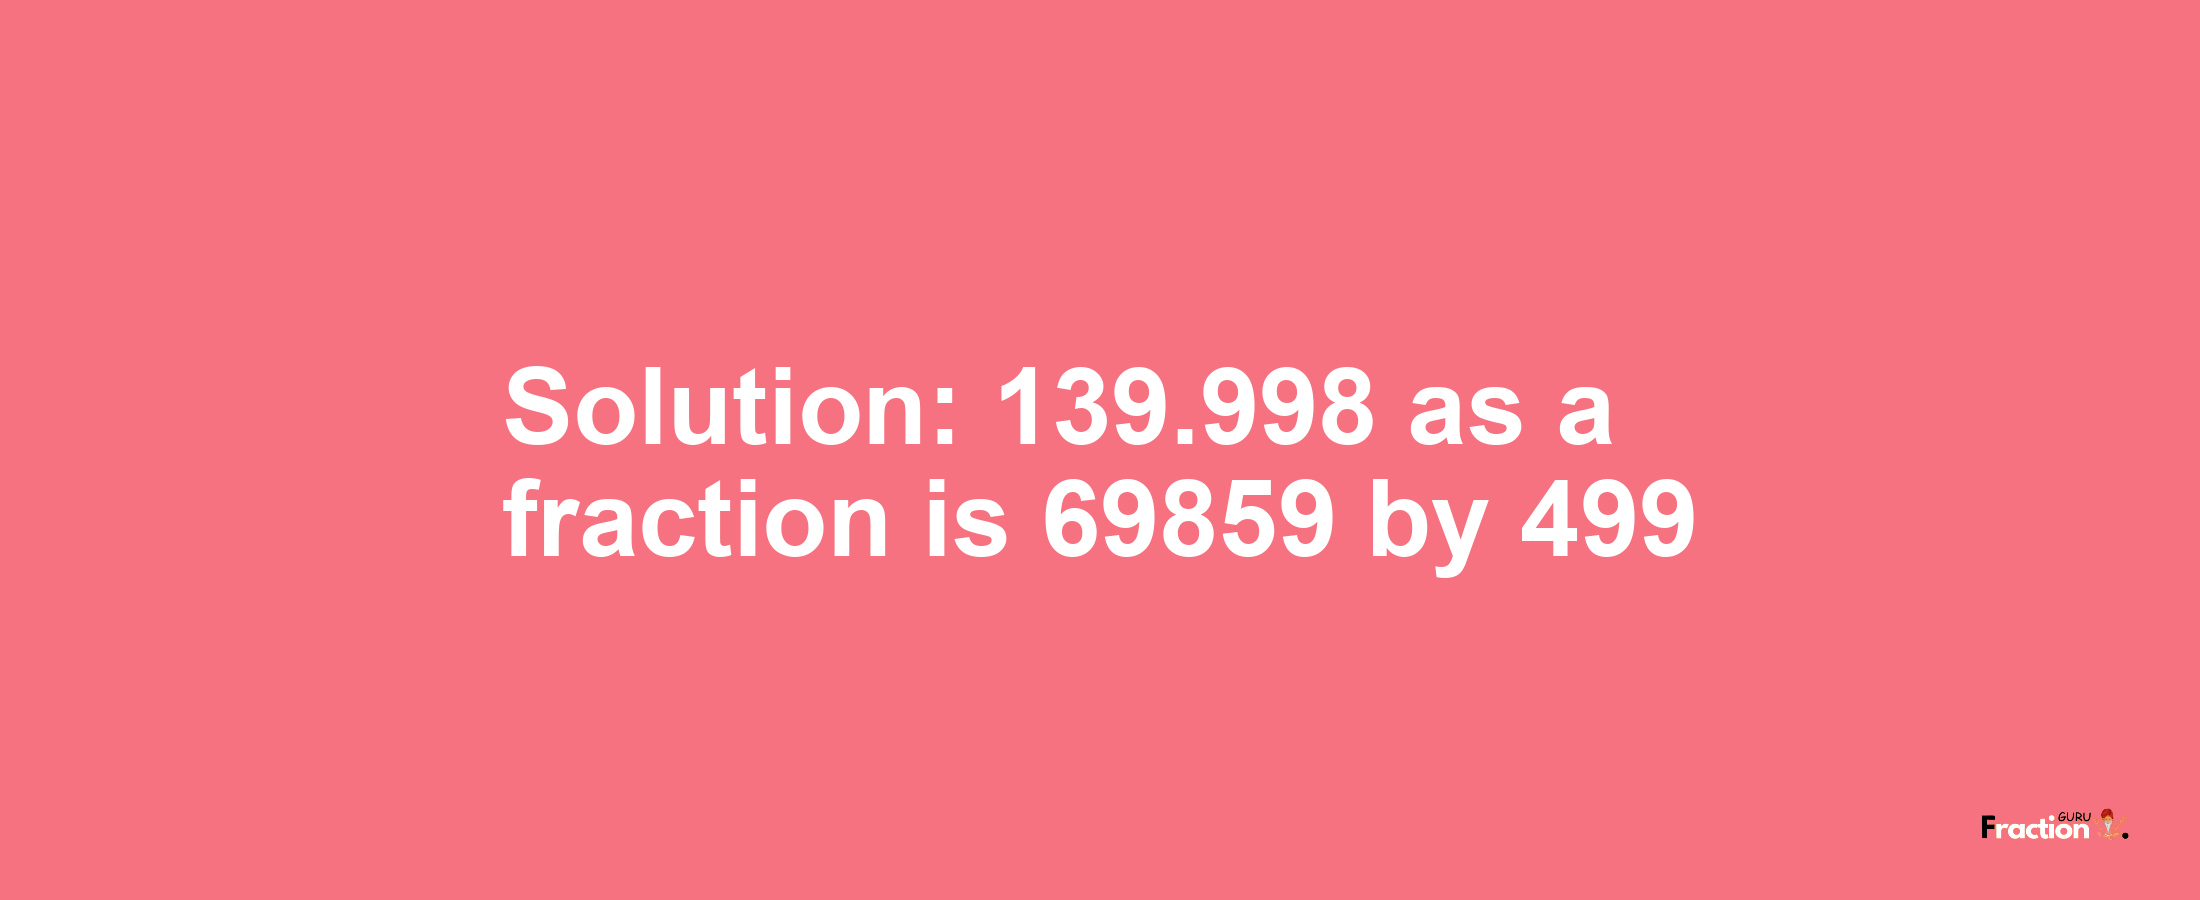 Solution:139.998 as a fraction is 69859/499